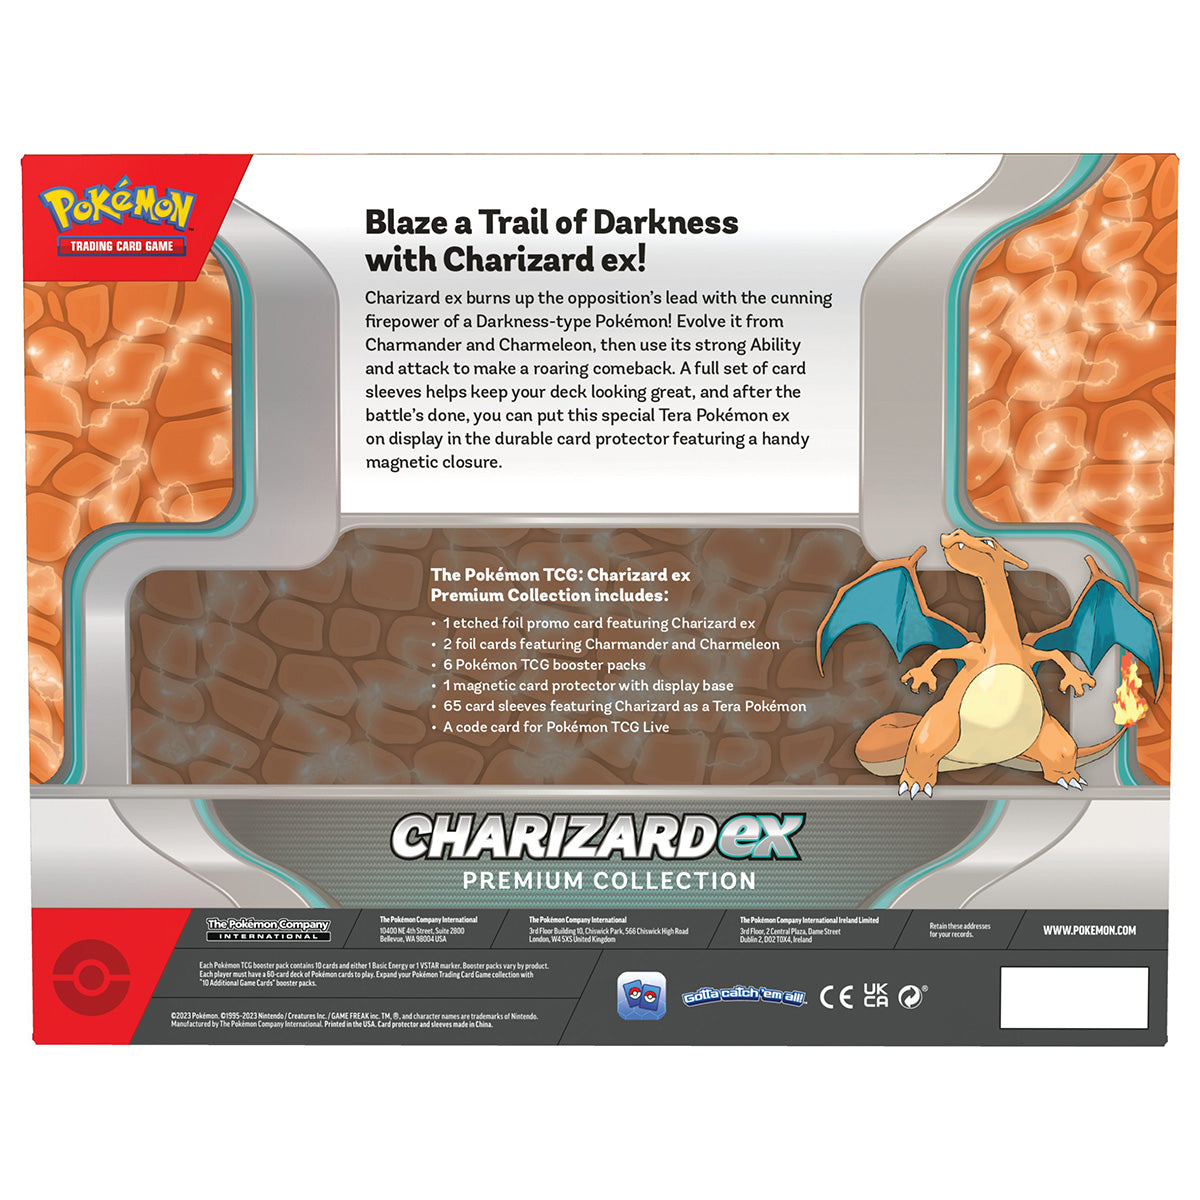 back view of the charizard ex premium collection